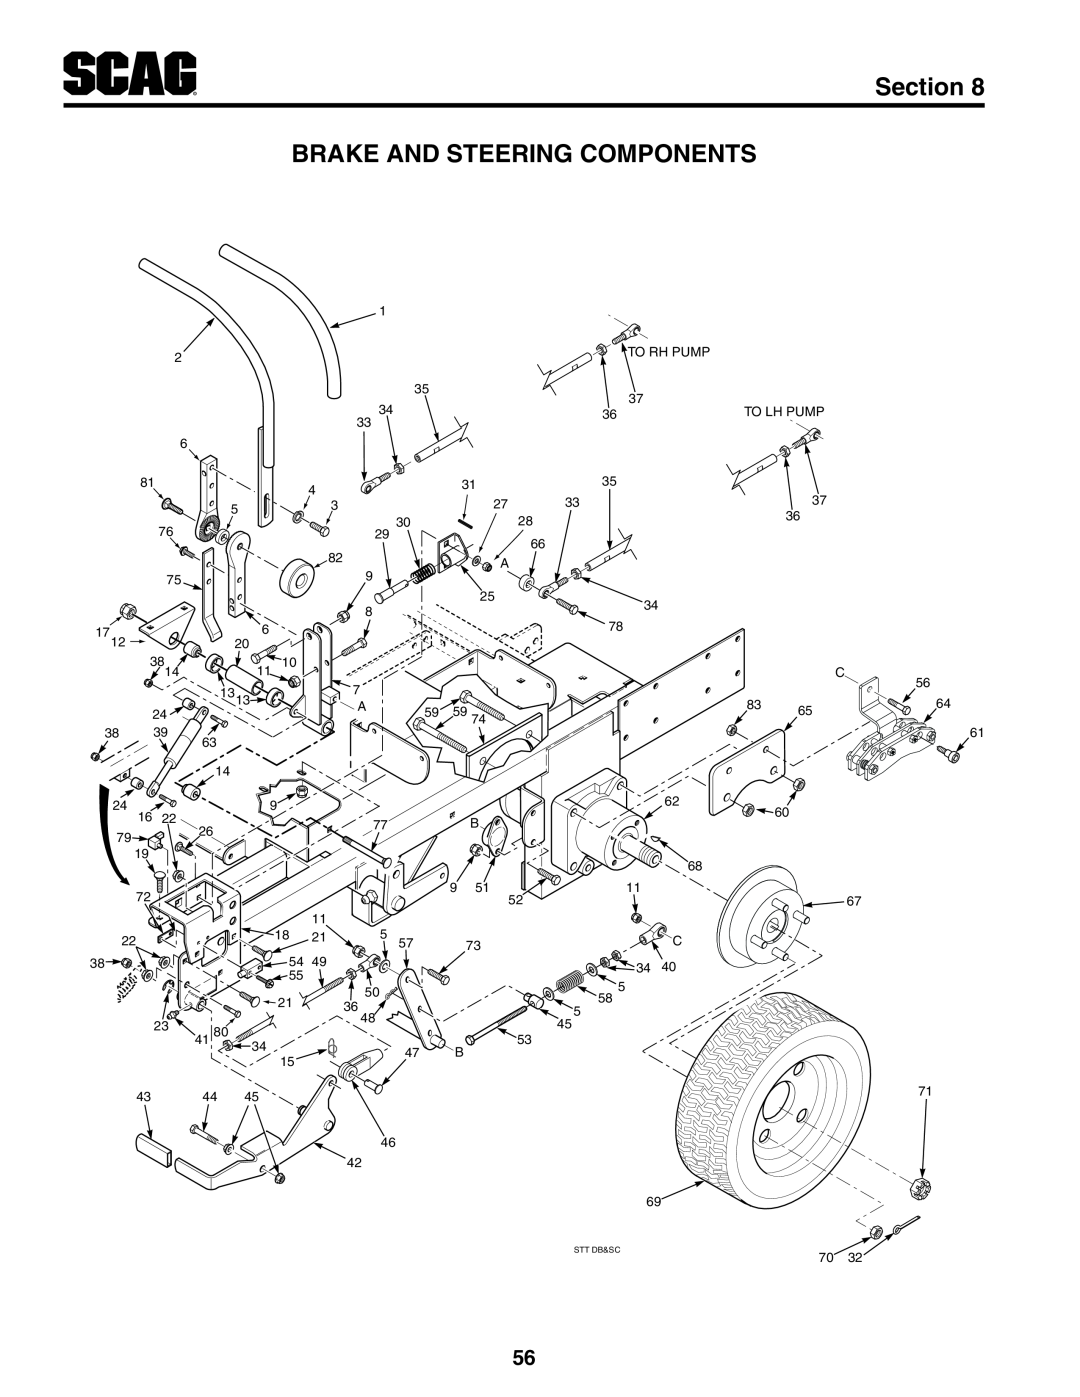 Scag Power Equipment STT-31EFI-SS Brake And Steering Components, Section, 1712, 3814, To Rh Pump, To Lh Pump, Stt Db&Sc 